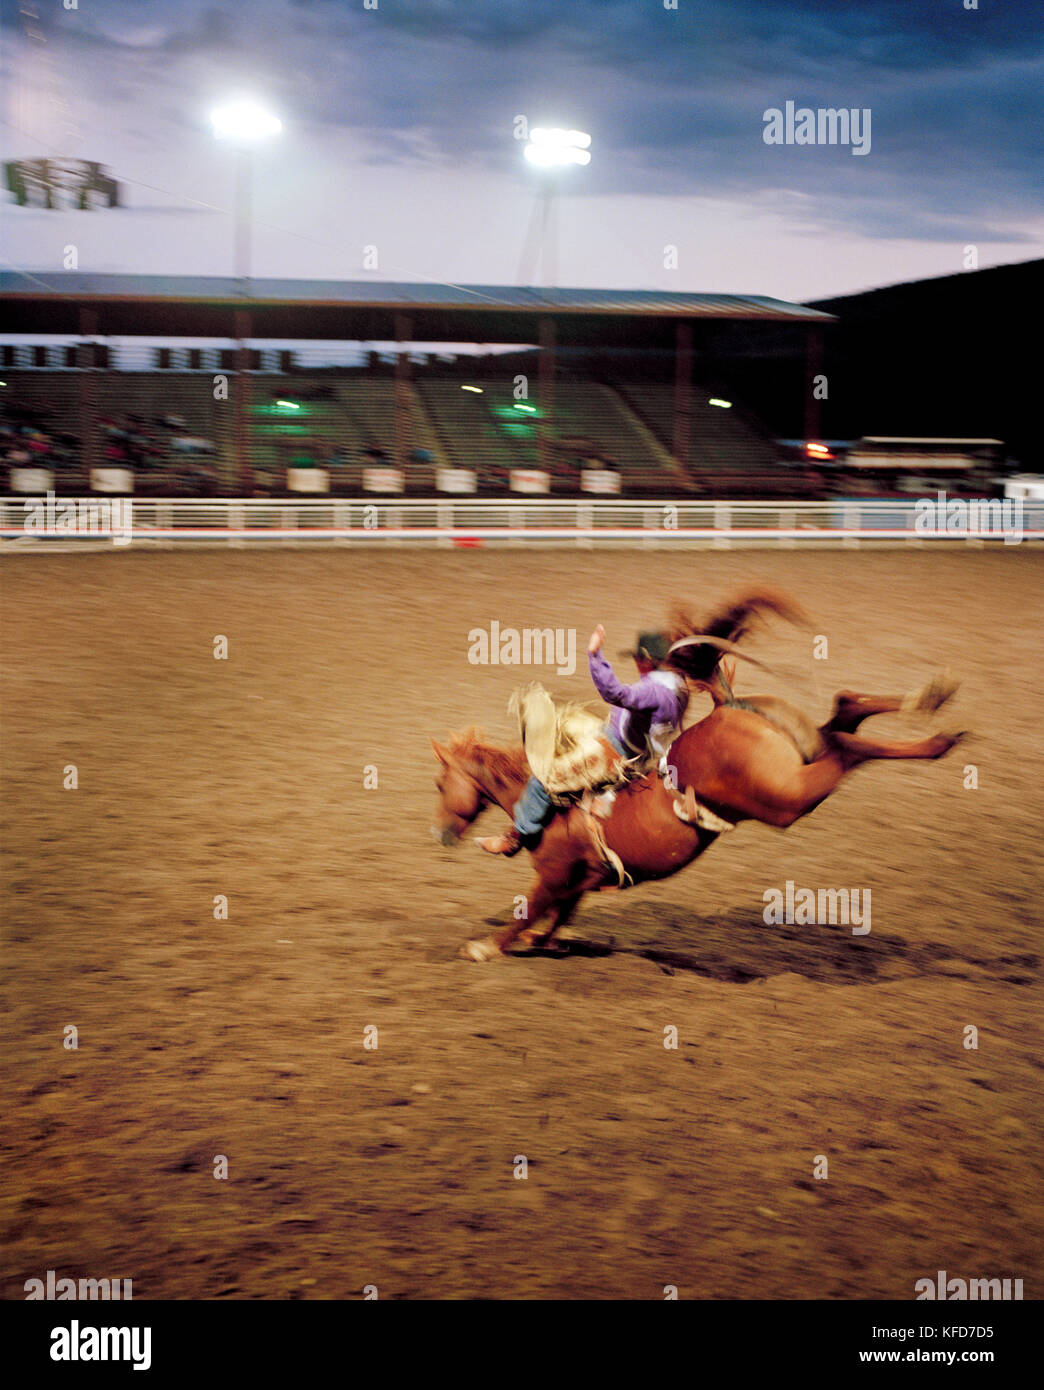 Usa, Wyoming, saddle bronc rider au Cody rodeo Banque D'Images